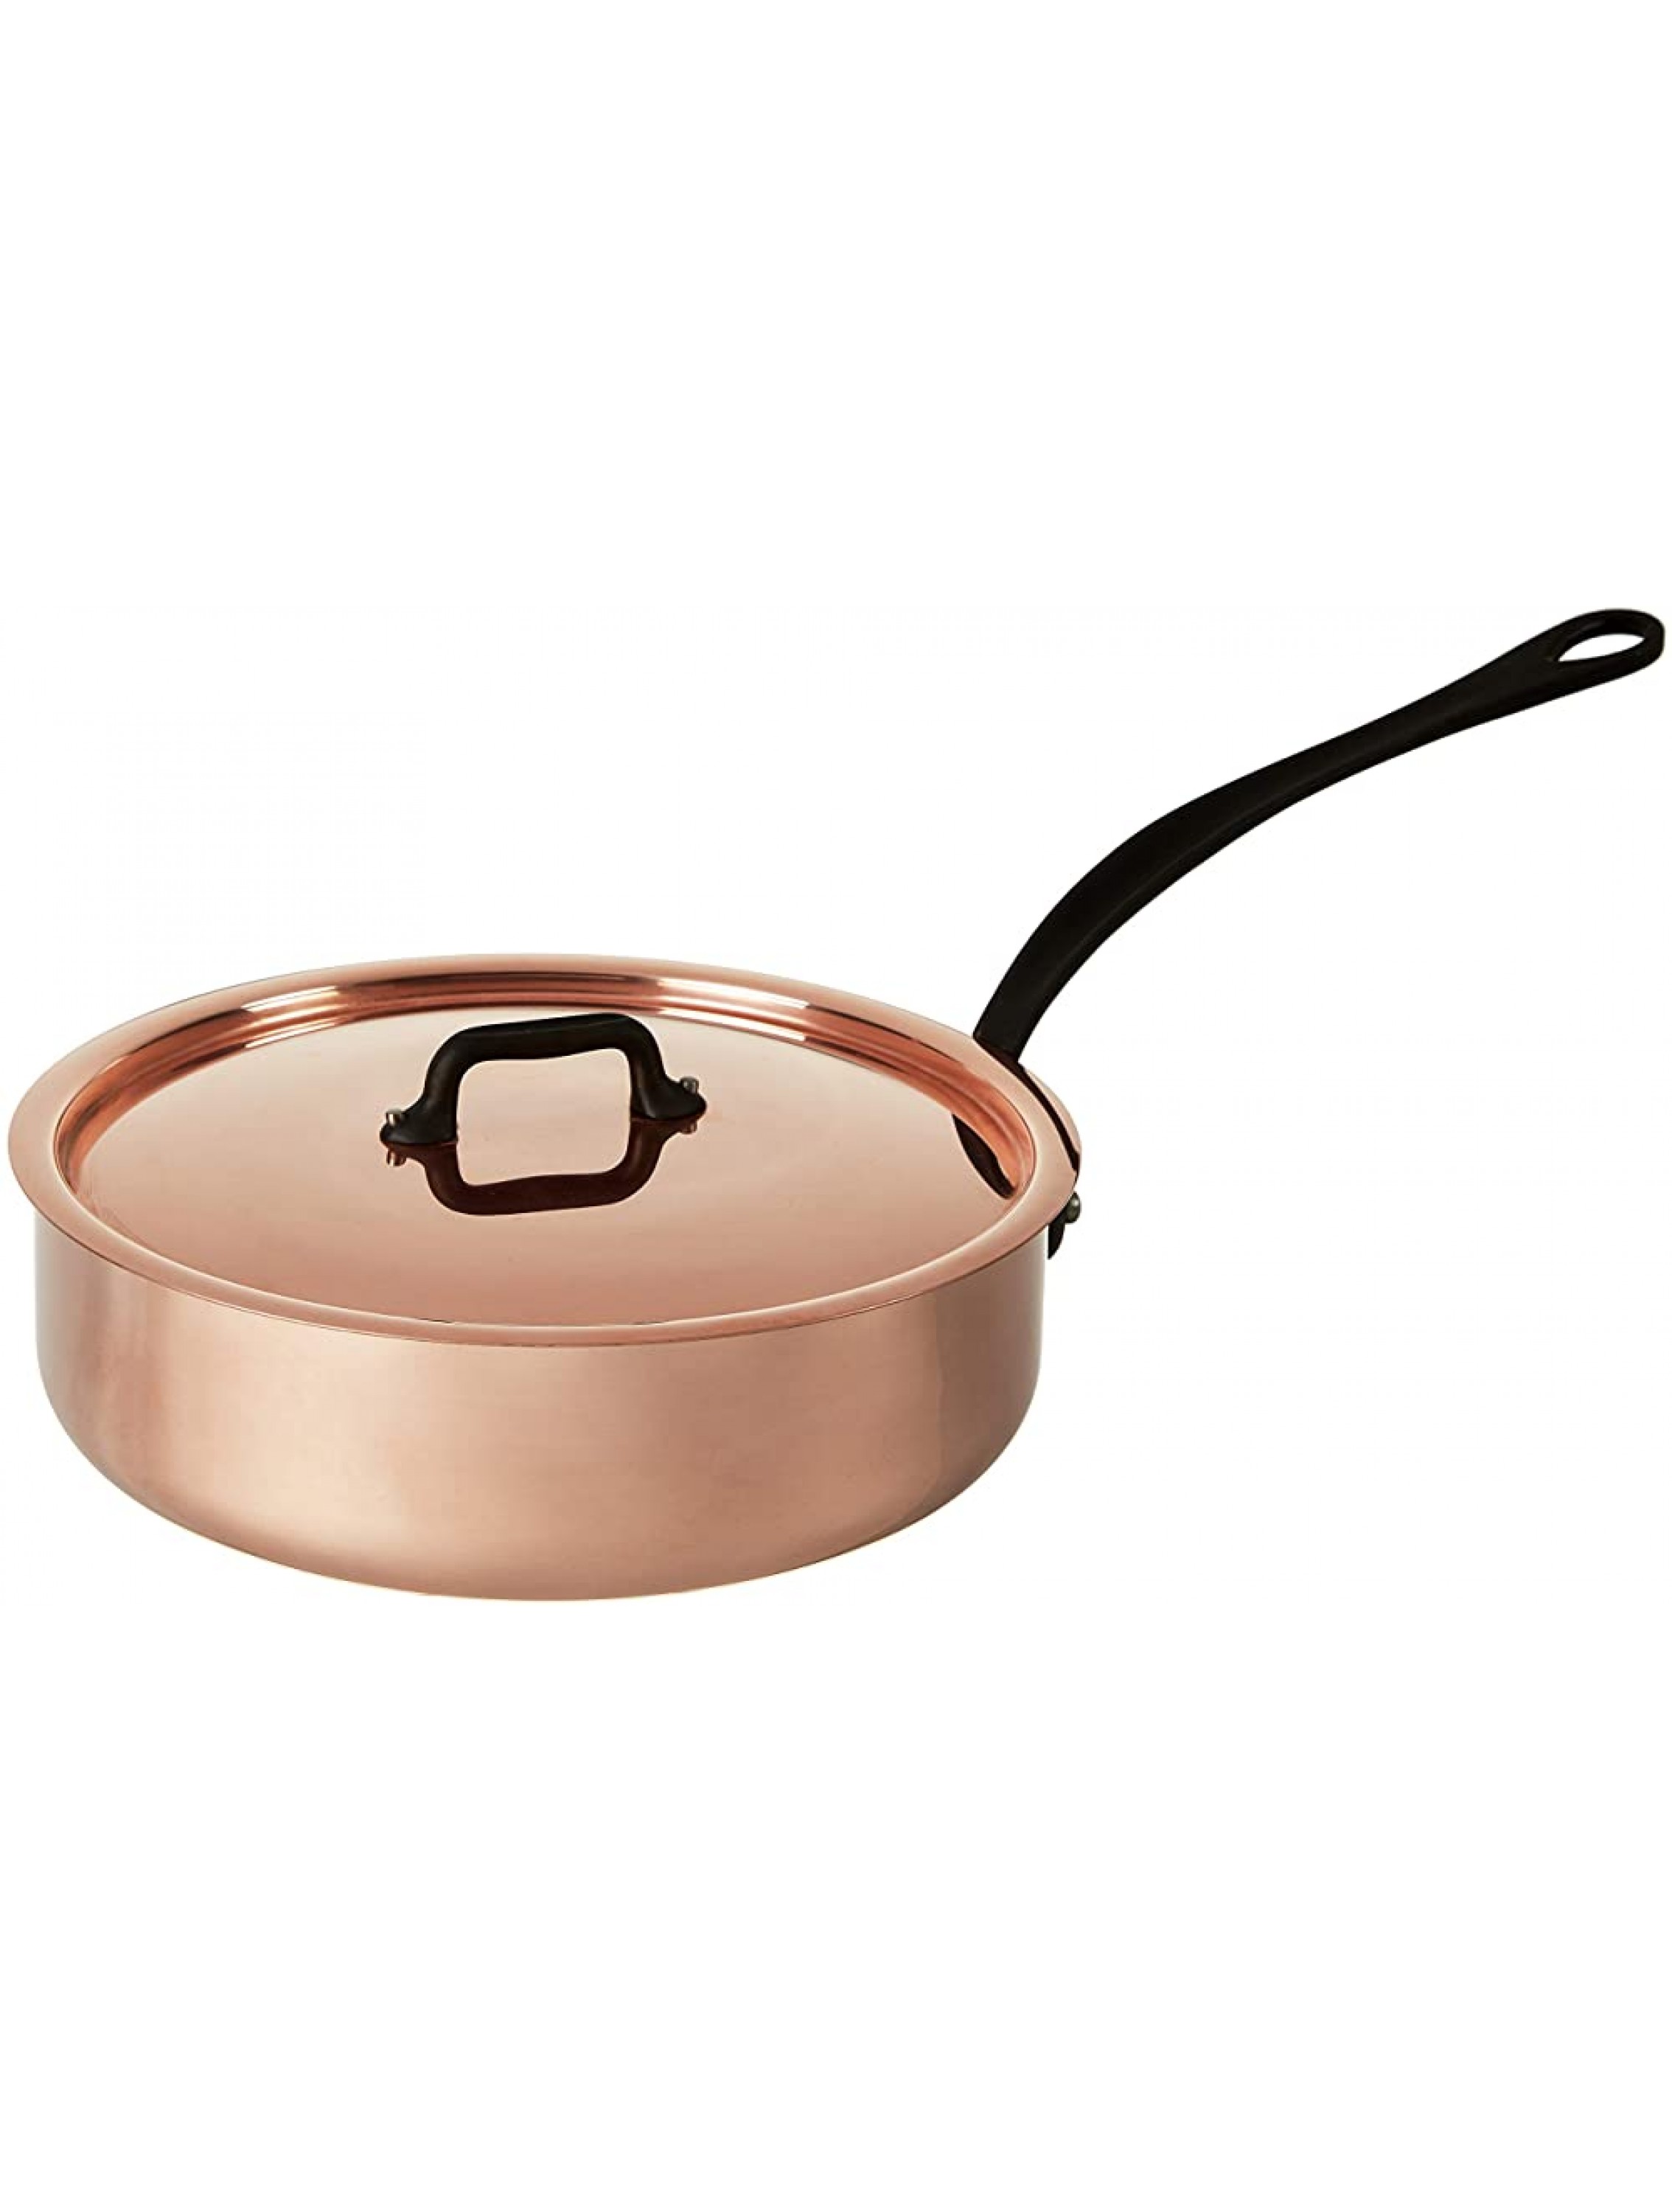 Mauviel M'Heritage M150C Copper Saute Pan with Lid. 3L 3.5 quart 24 cm. 9.5 with Cast Stainless Steel Iron Eletroplated Handle - BYWSM7BZS